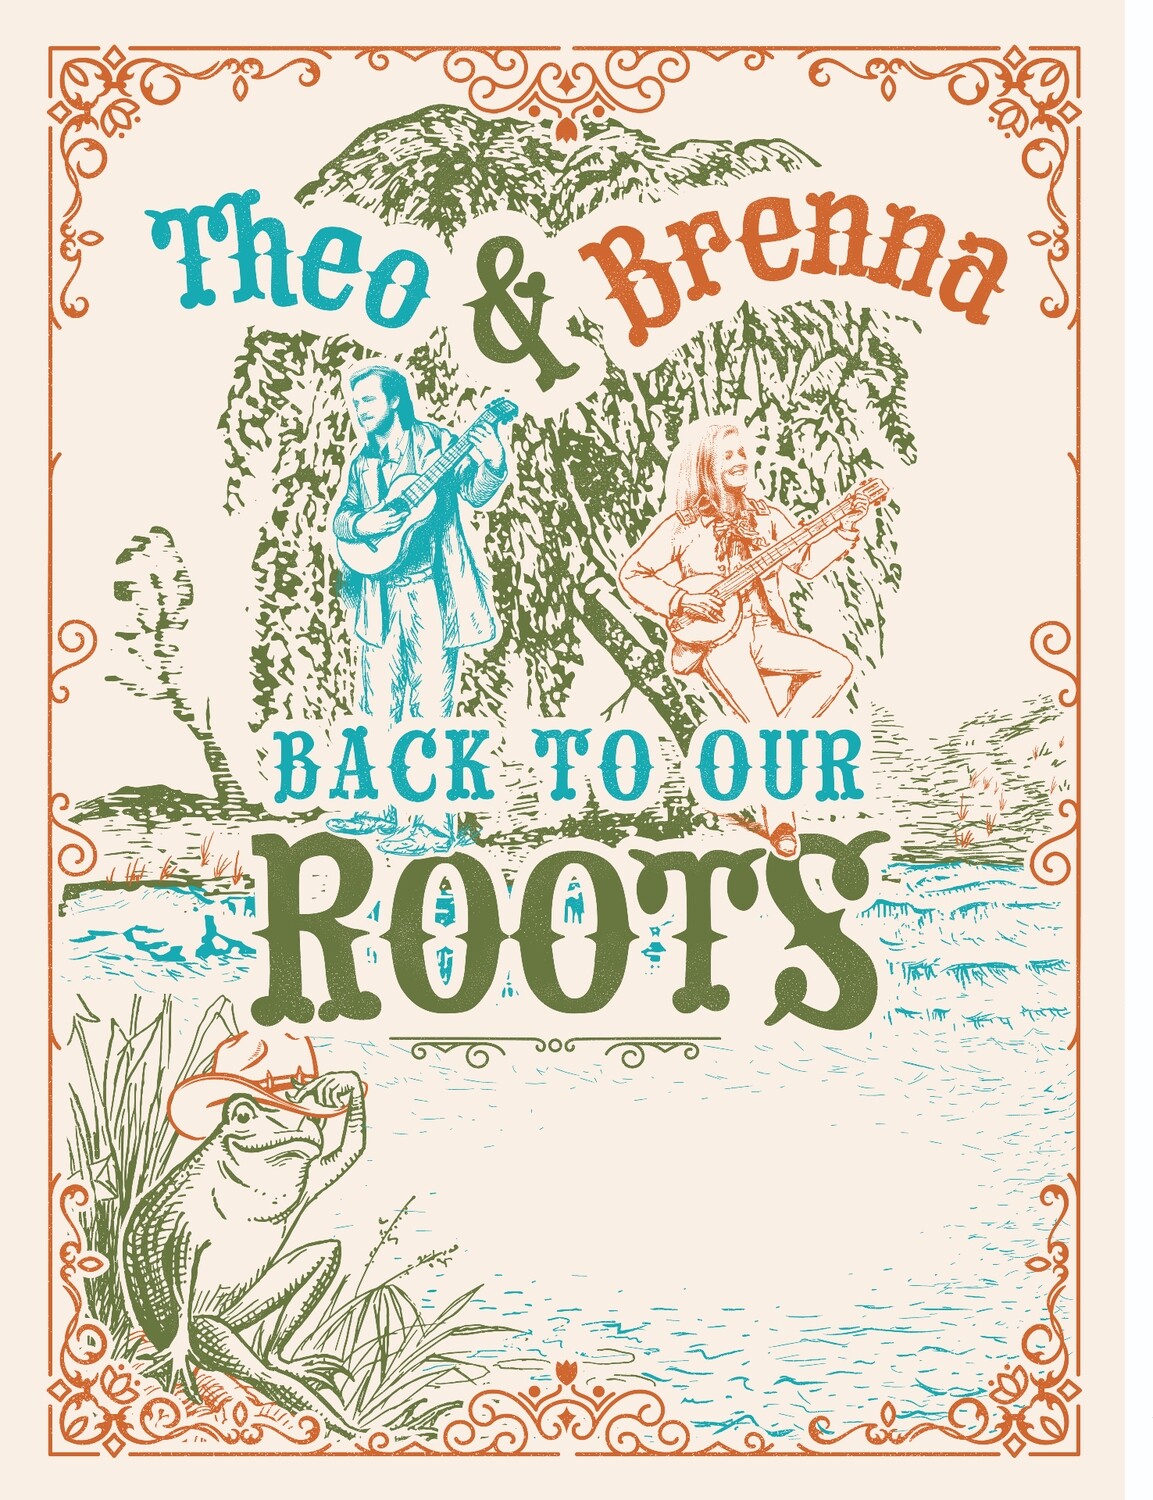 "Back To Our Roots" Commemorative Poster (Signed by Theo & Brenna)